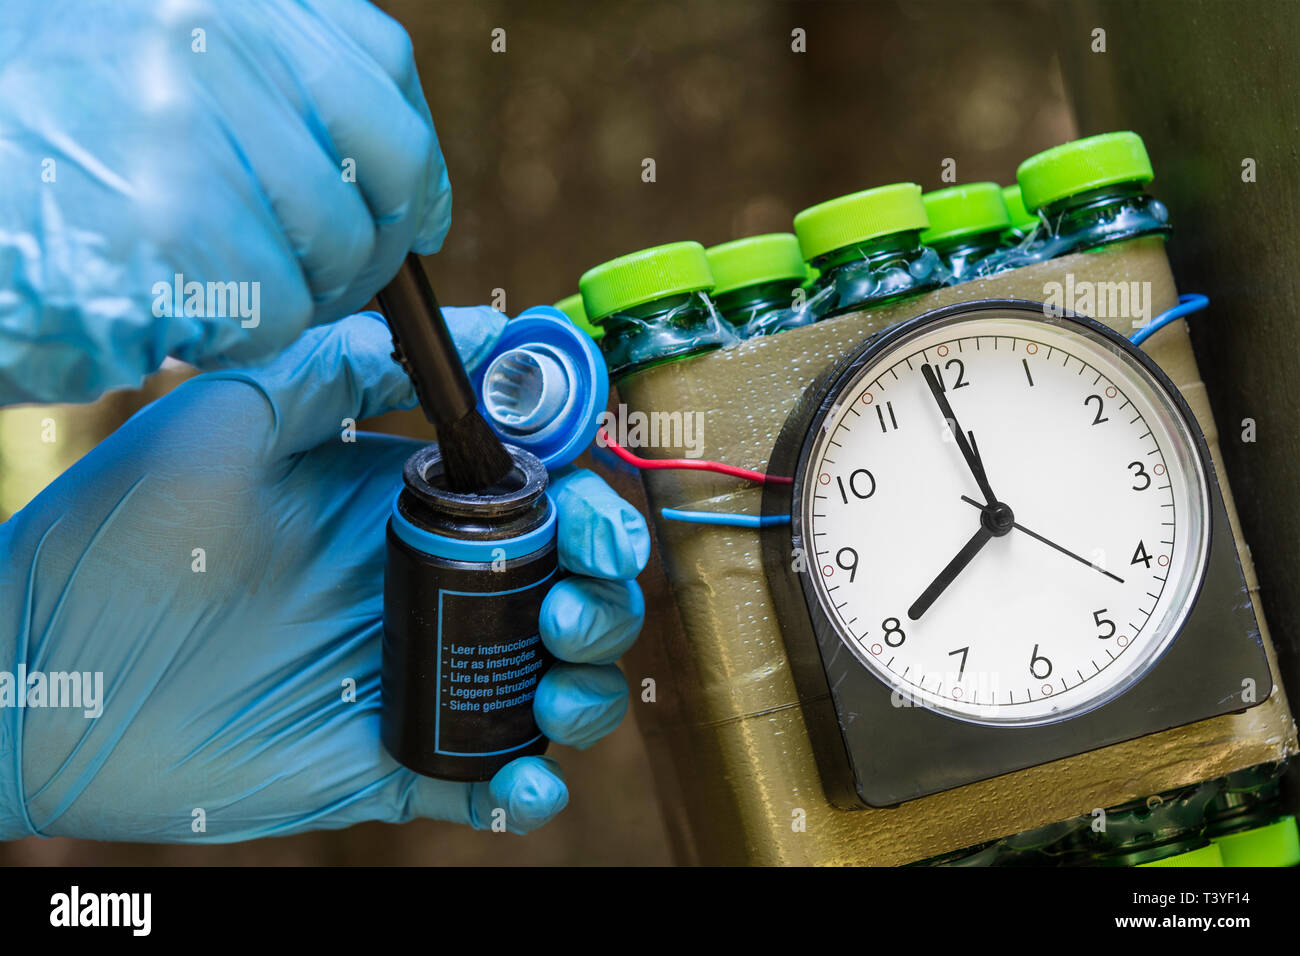 Time bomb. Forensic expert. Fingerprints search. Dummy weapon. Police detective investigates clues. Human hands, blue gloves, brush. Terrorism, crime. Stock Photo